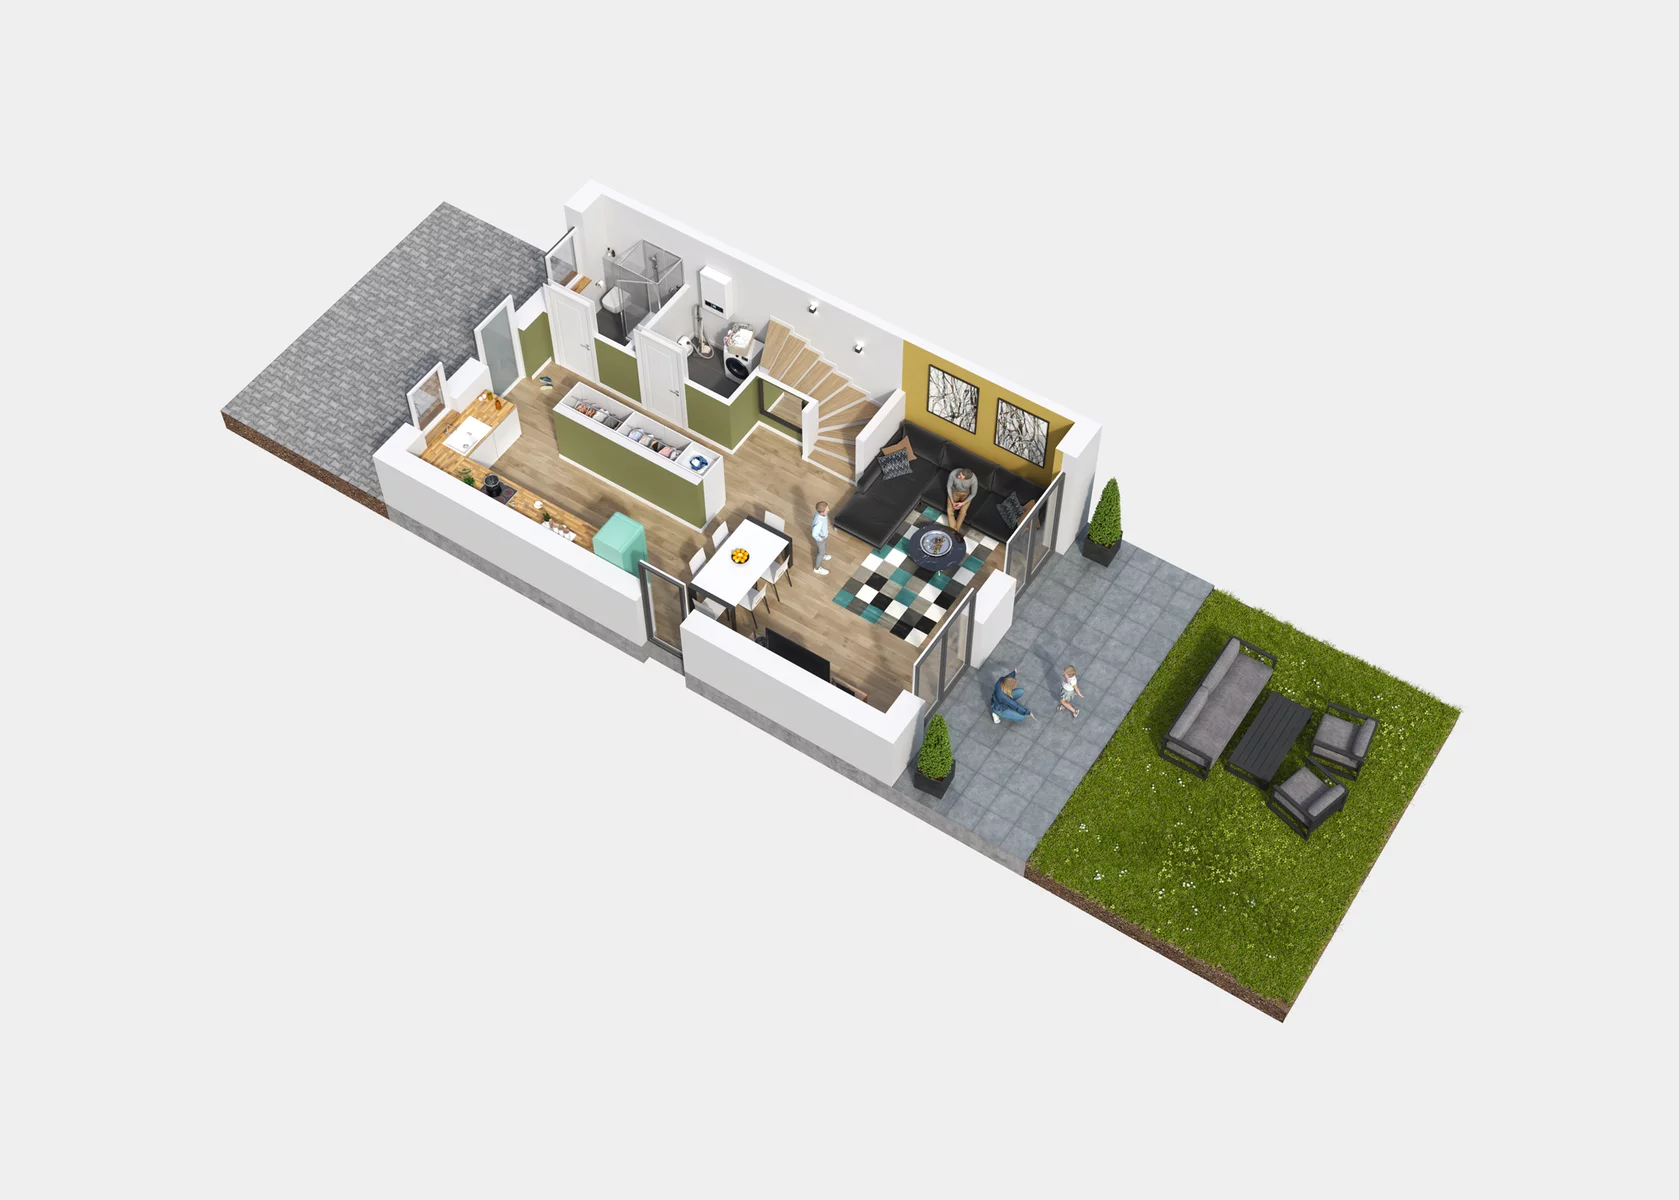 Visualization of the ground floor in the house MODERN LIVING 115 in the German city of Halle